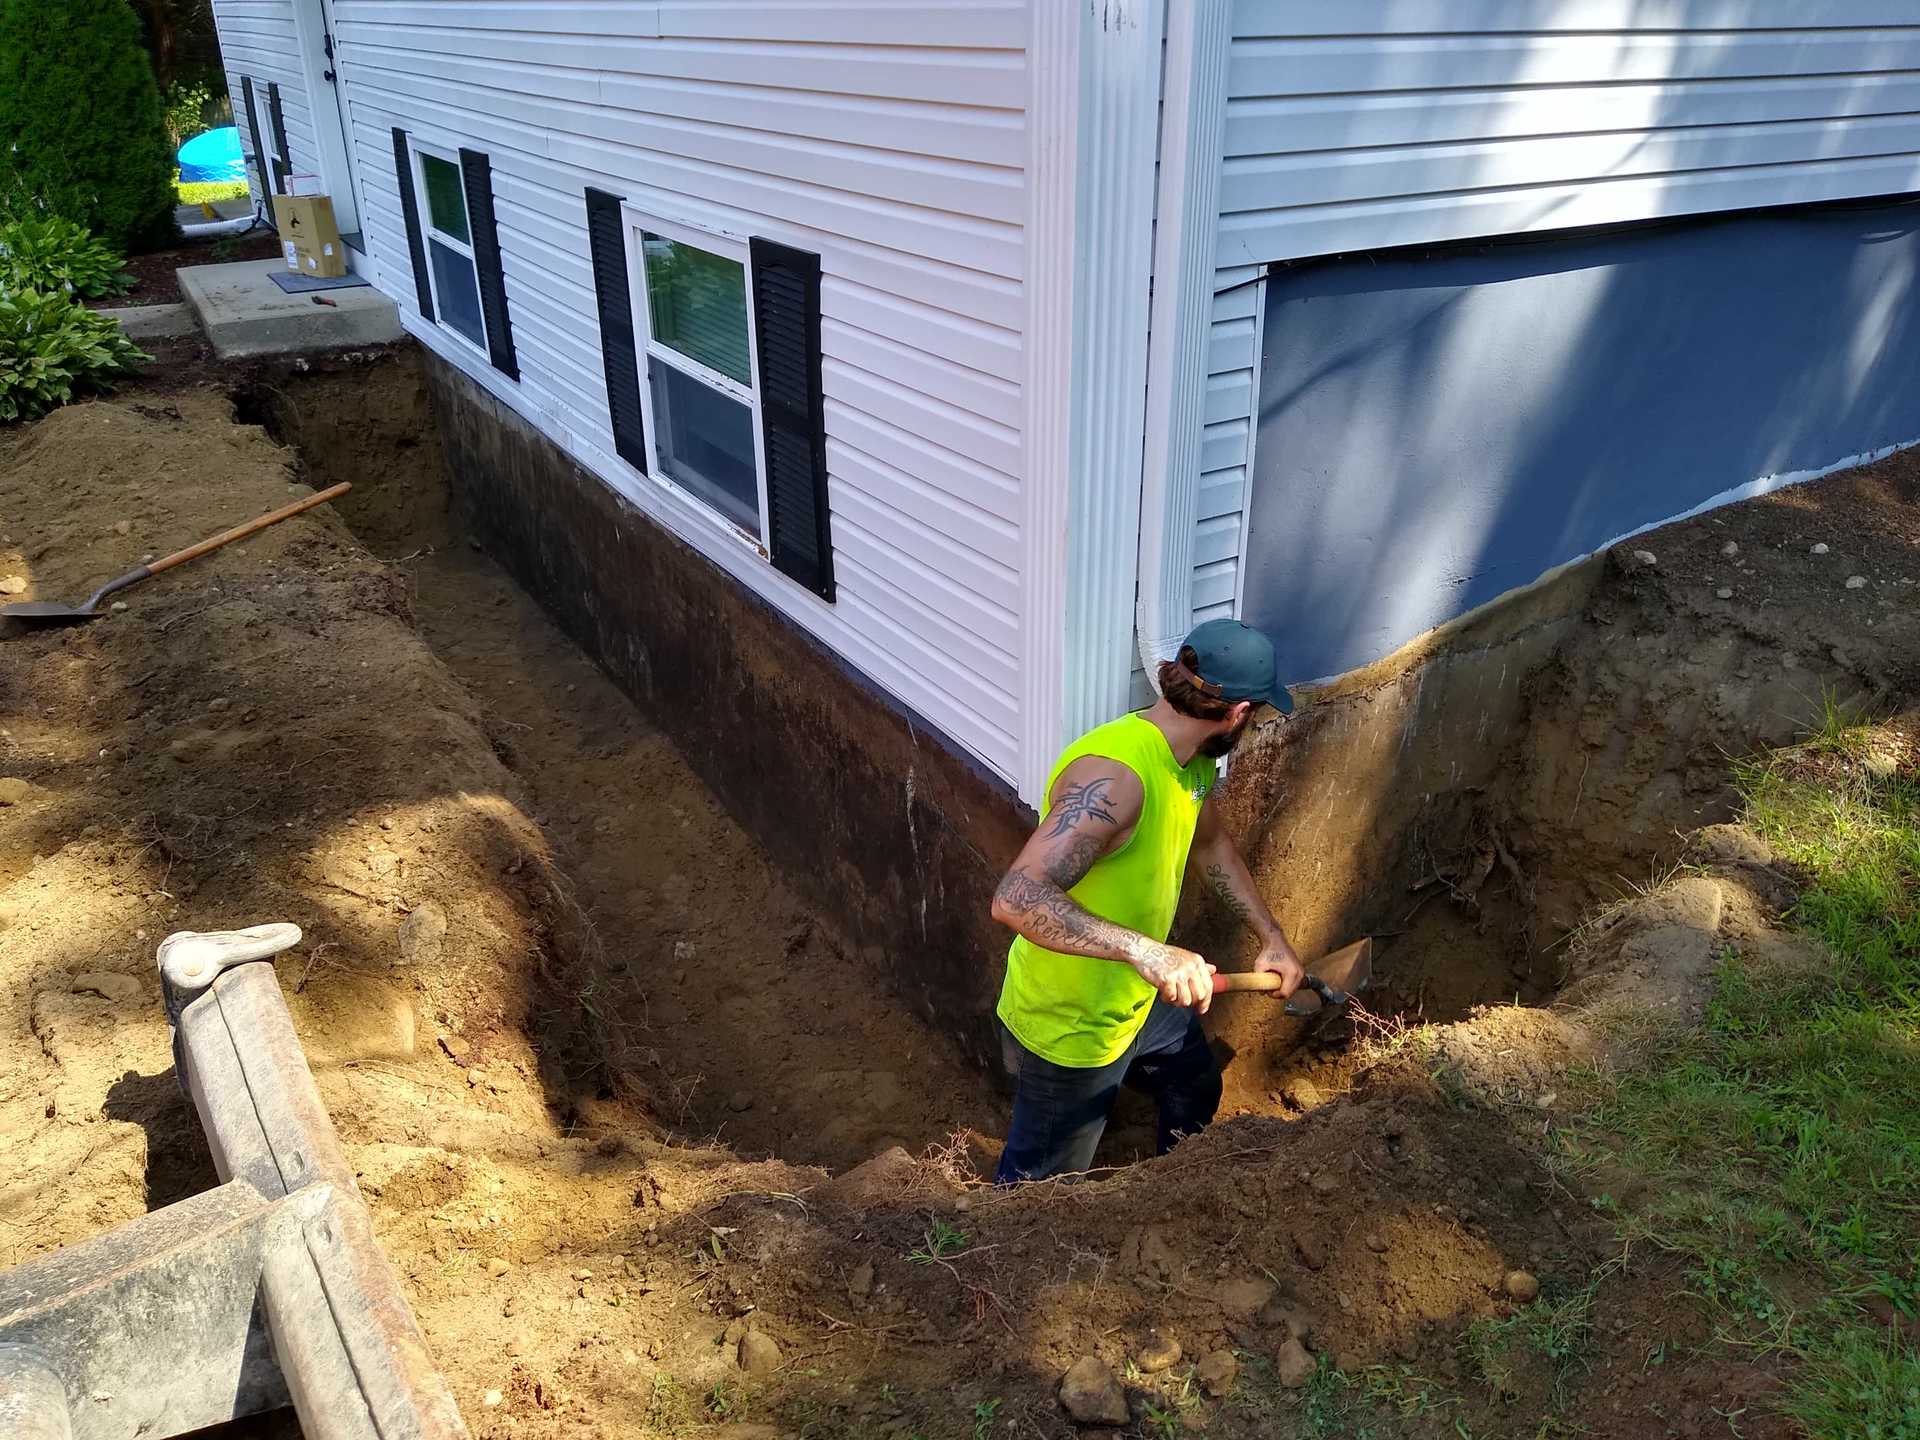 Hunter Environmental worker digging around a house